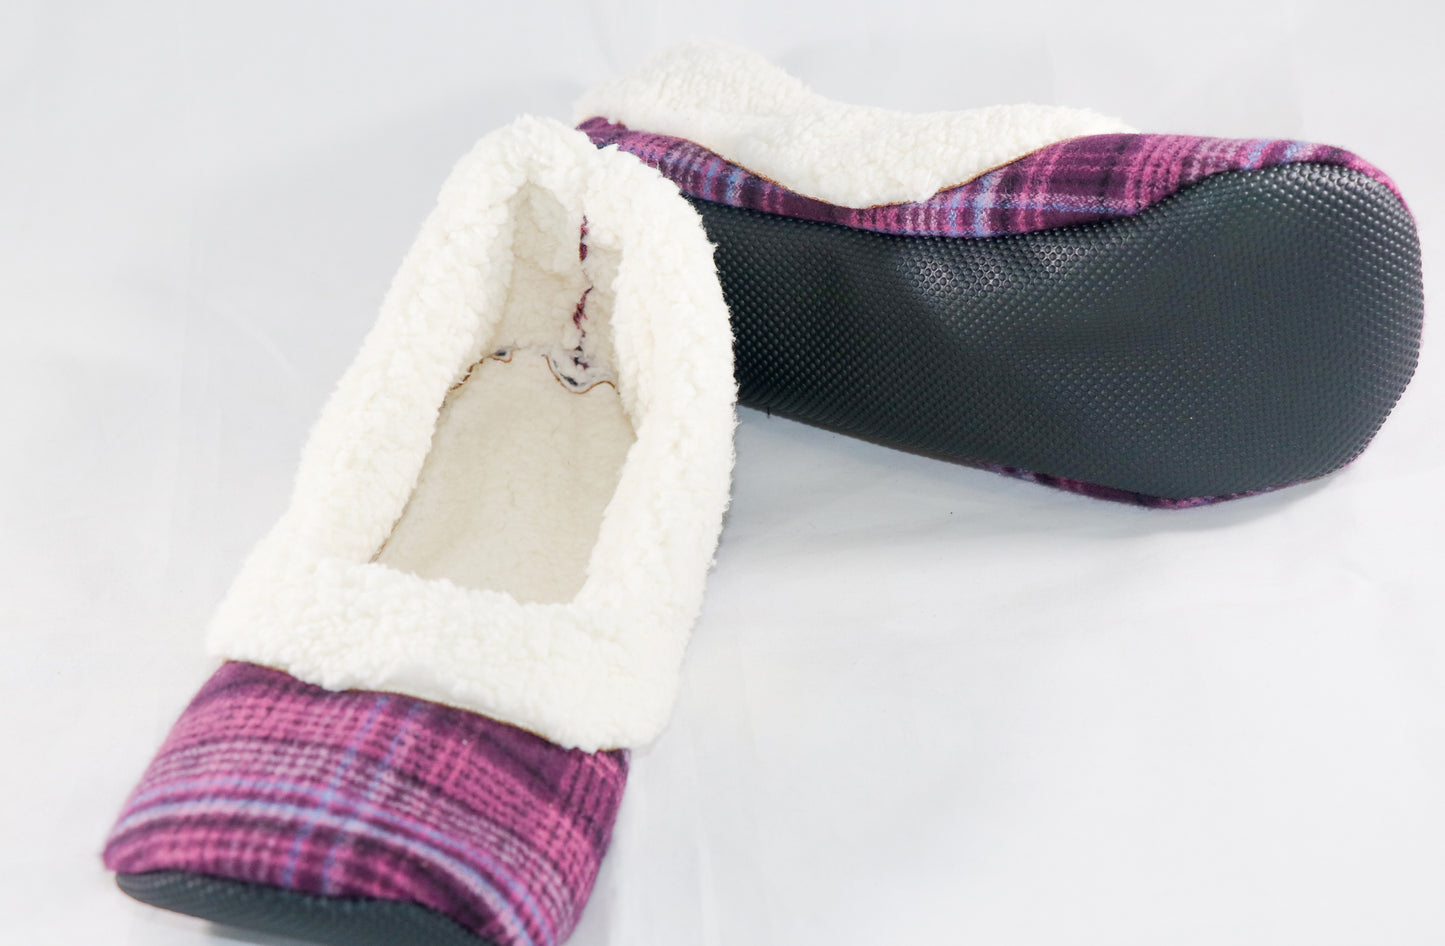 magenta plaid flannel slippers with sherpa lining and black neoprene soles